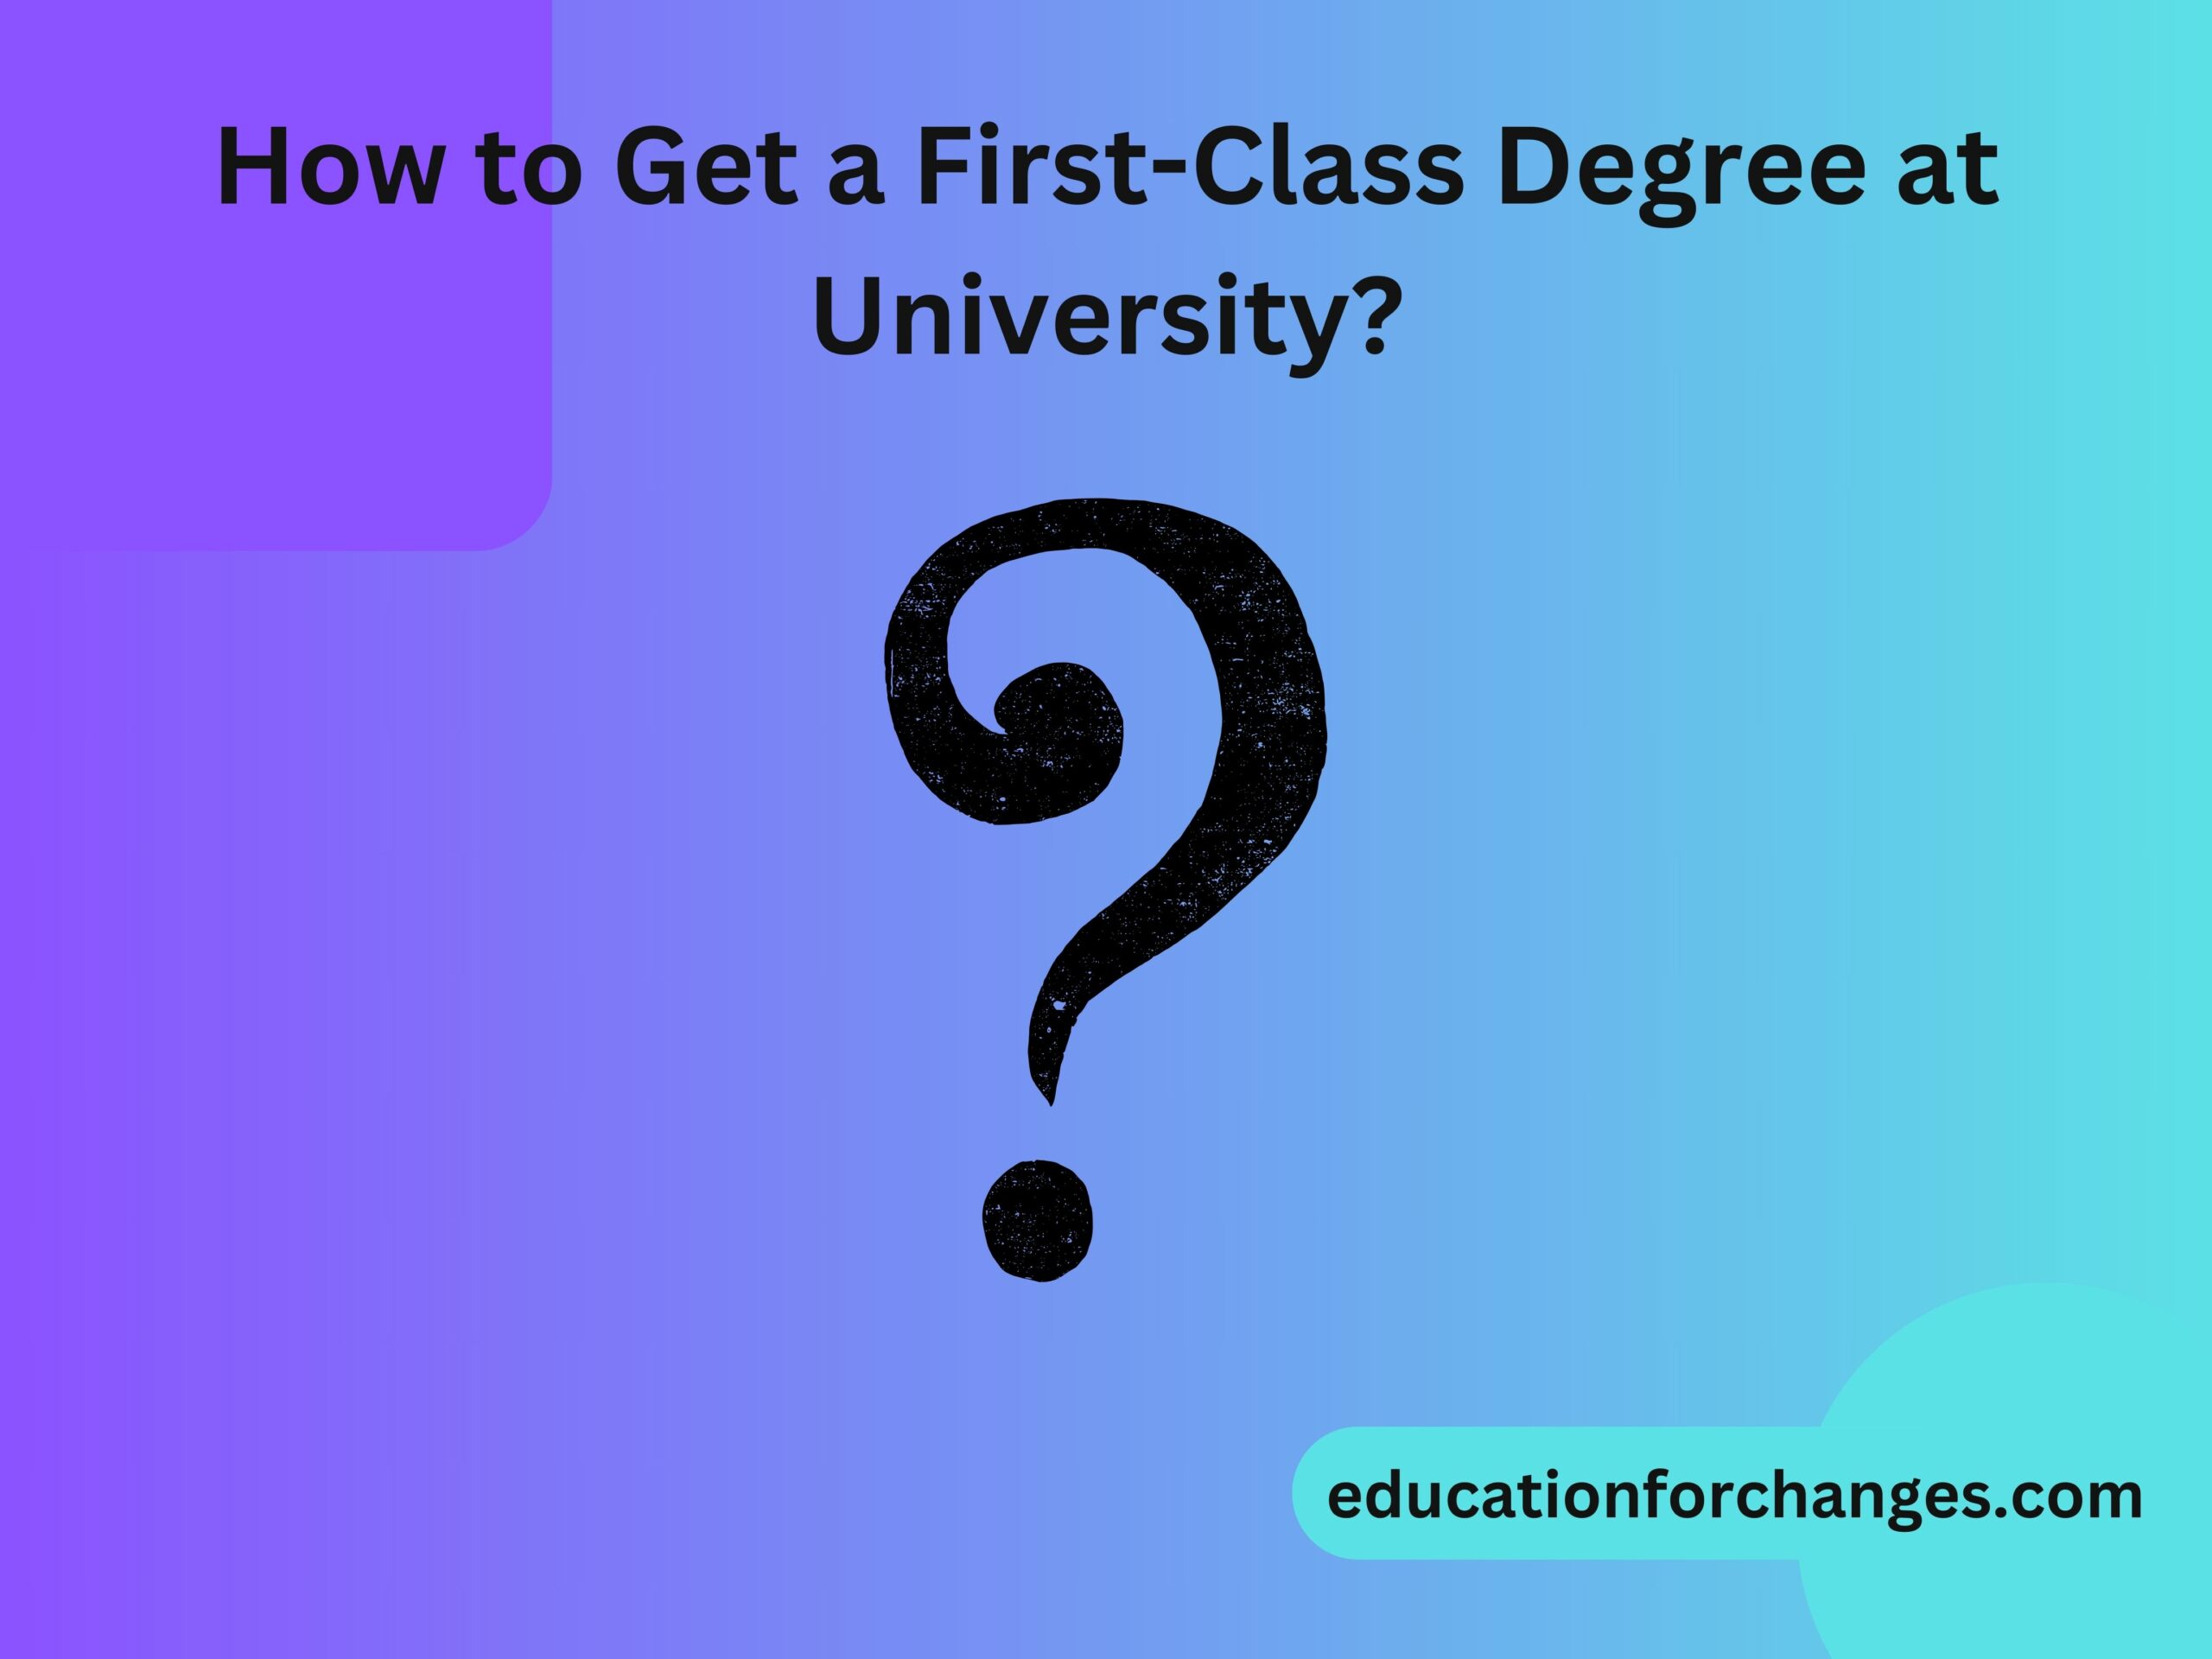 How to Get a First-Class Degree at University